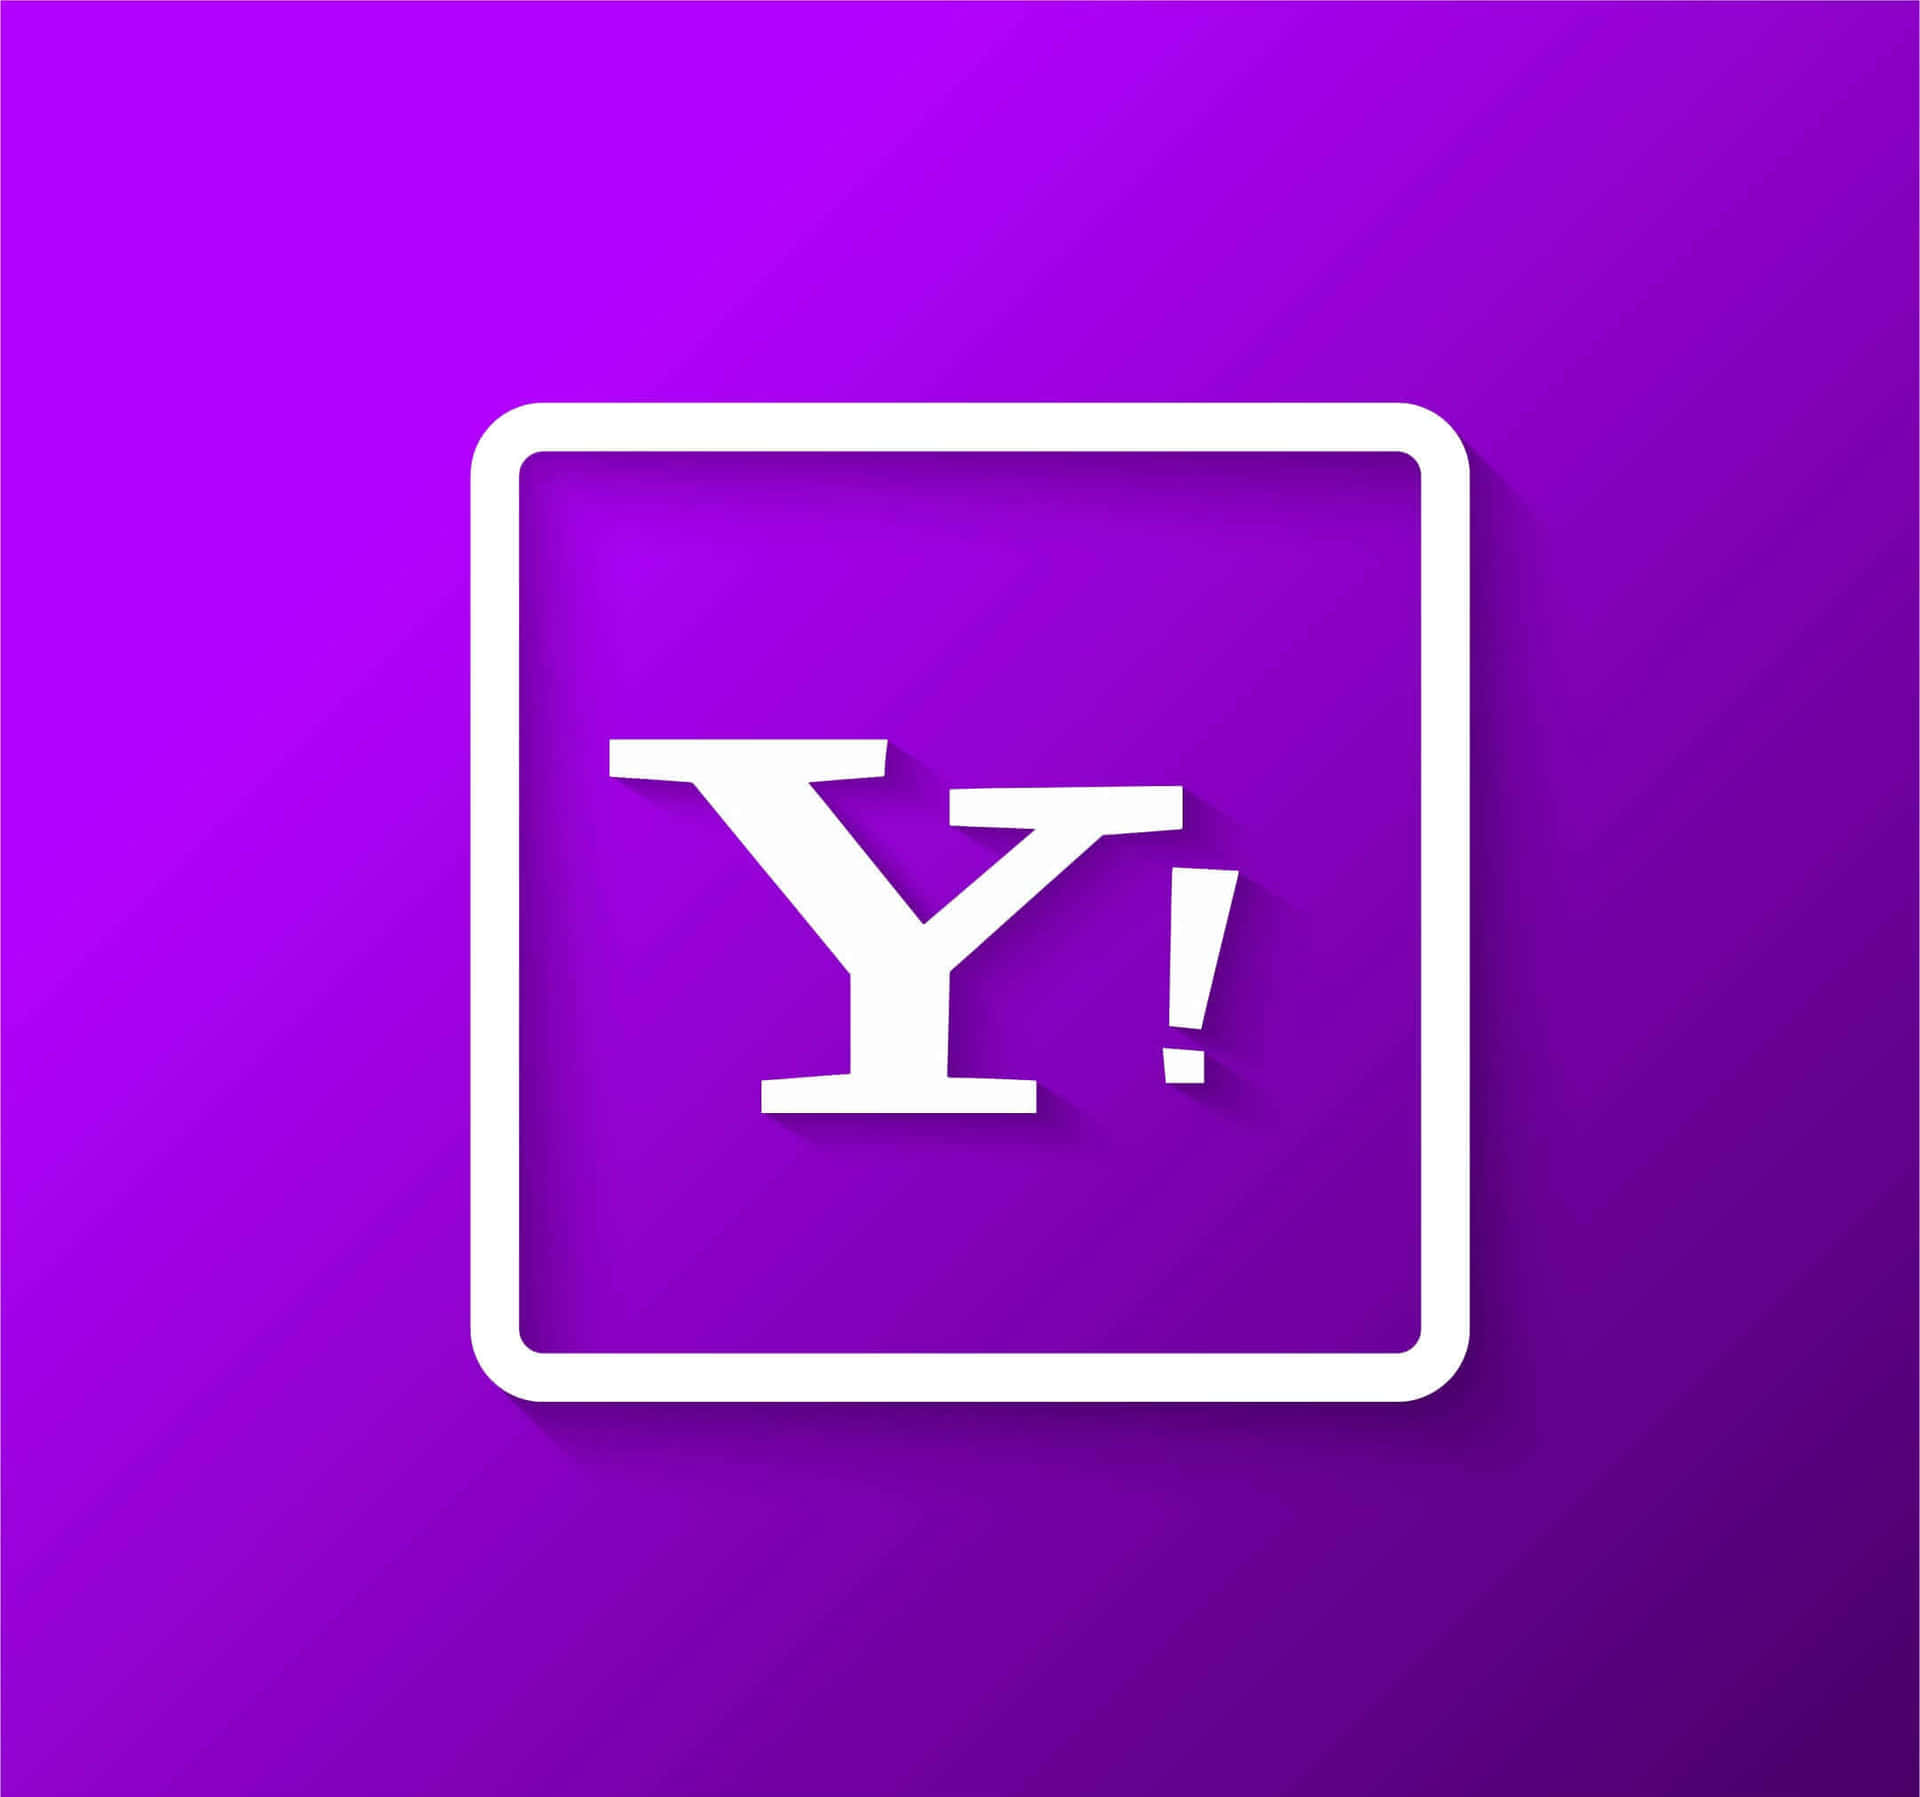 Yahoo. Get up-to-date news, sports and finance information.